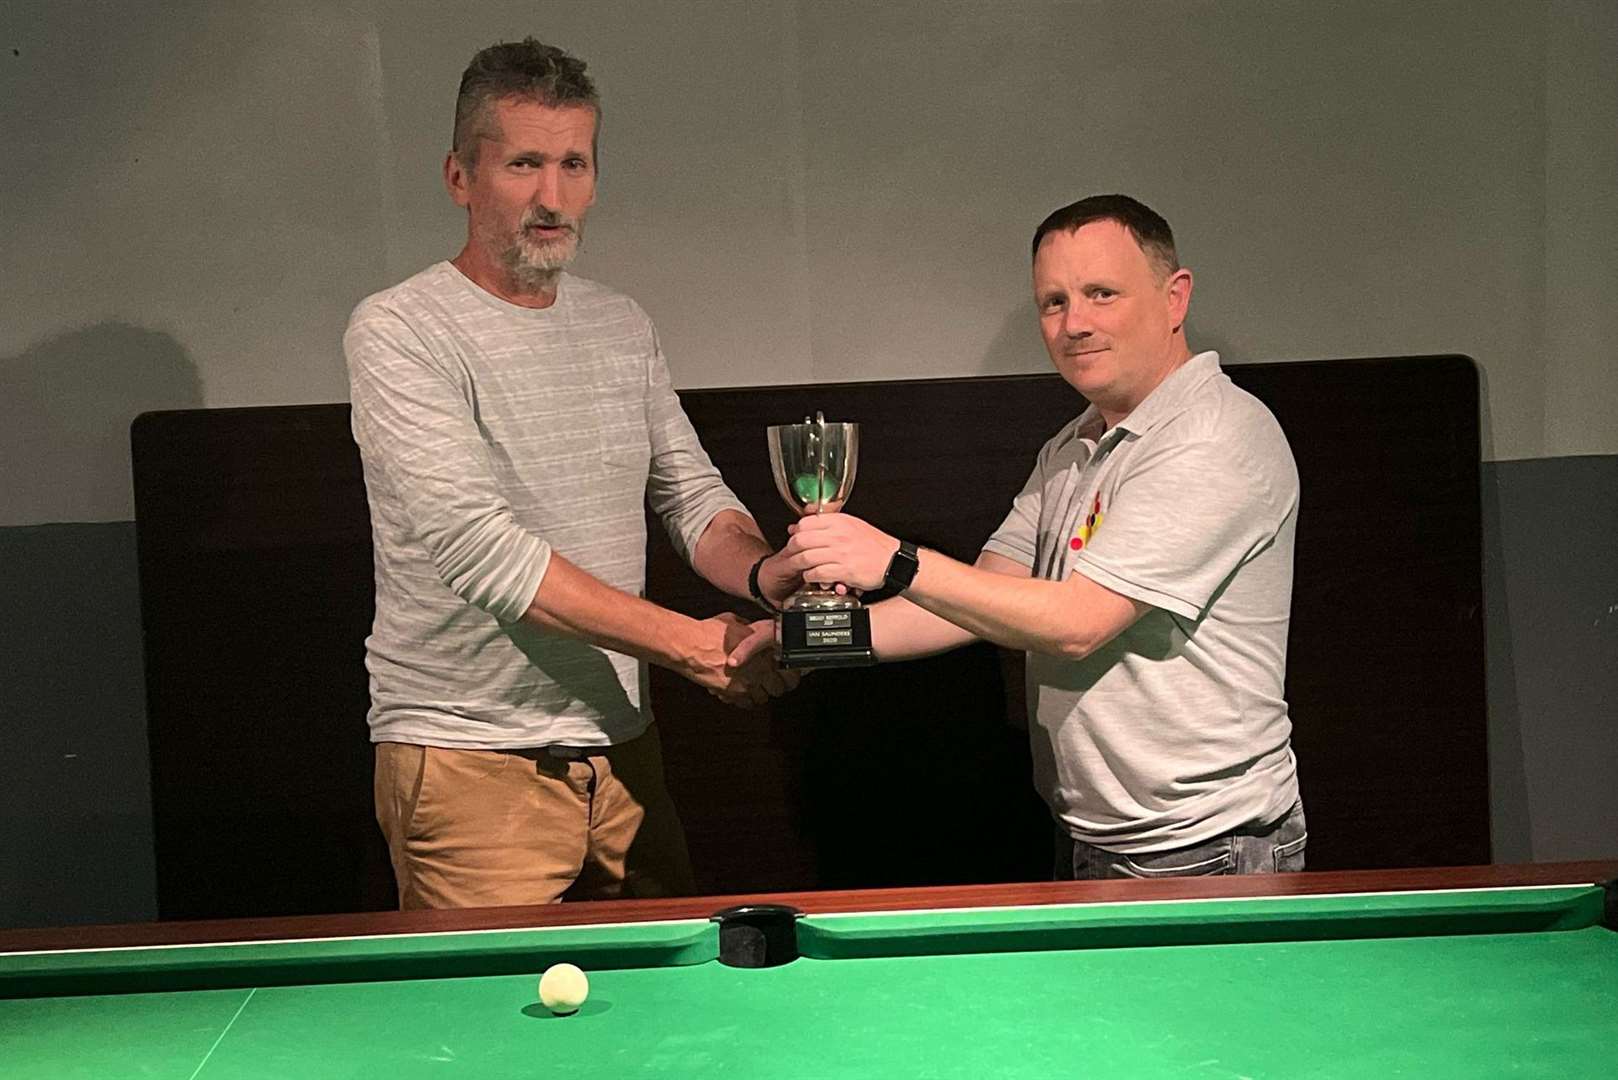 Aylesford club secretary Les Girling, left, presents the trophy to Simon Gillham